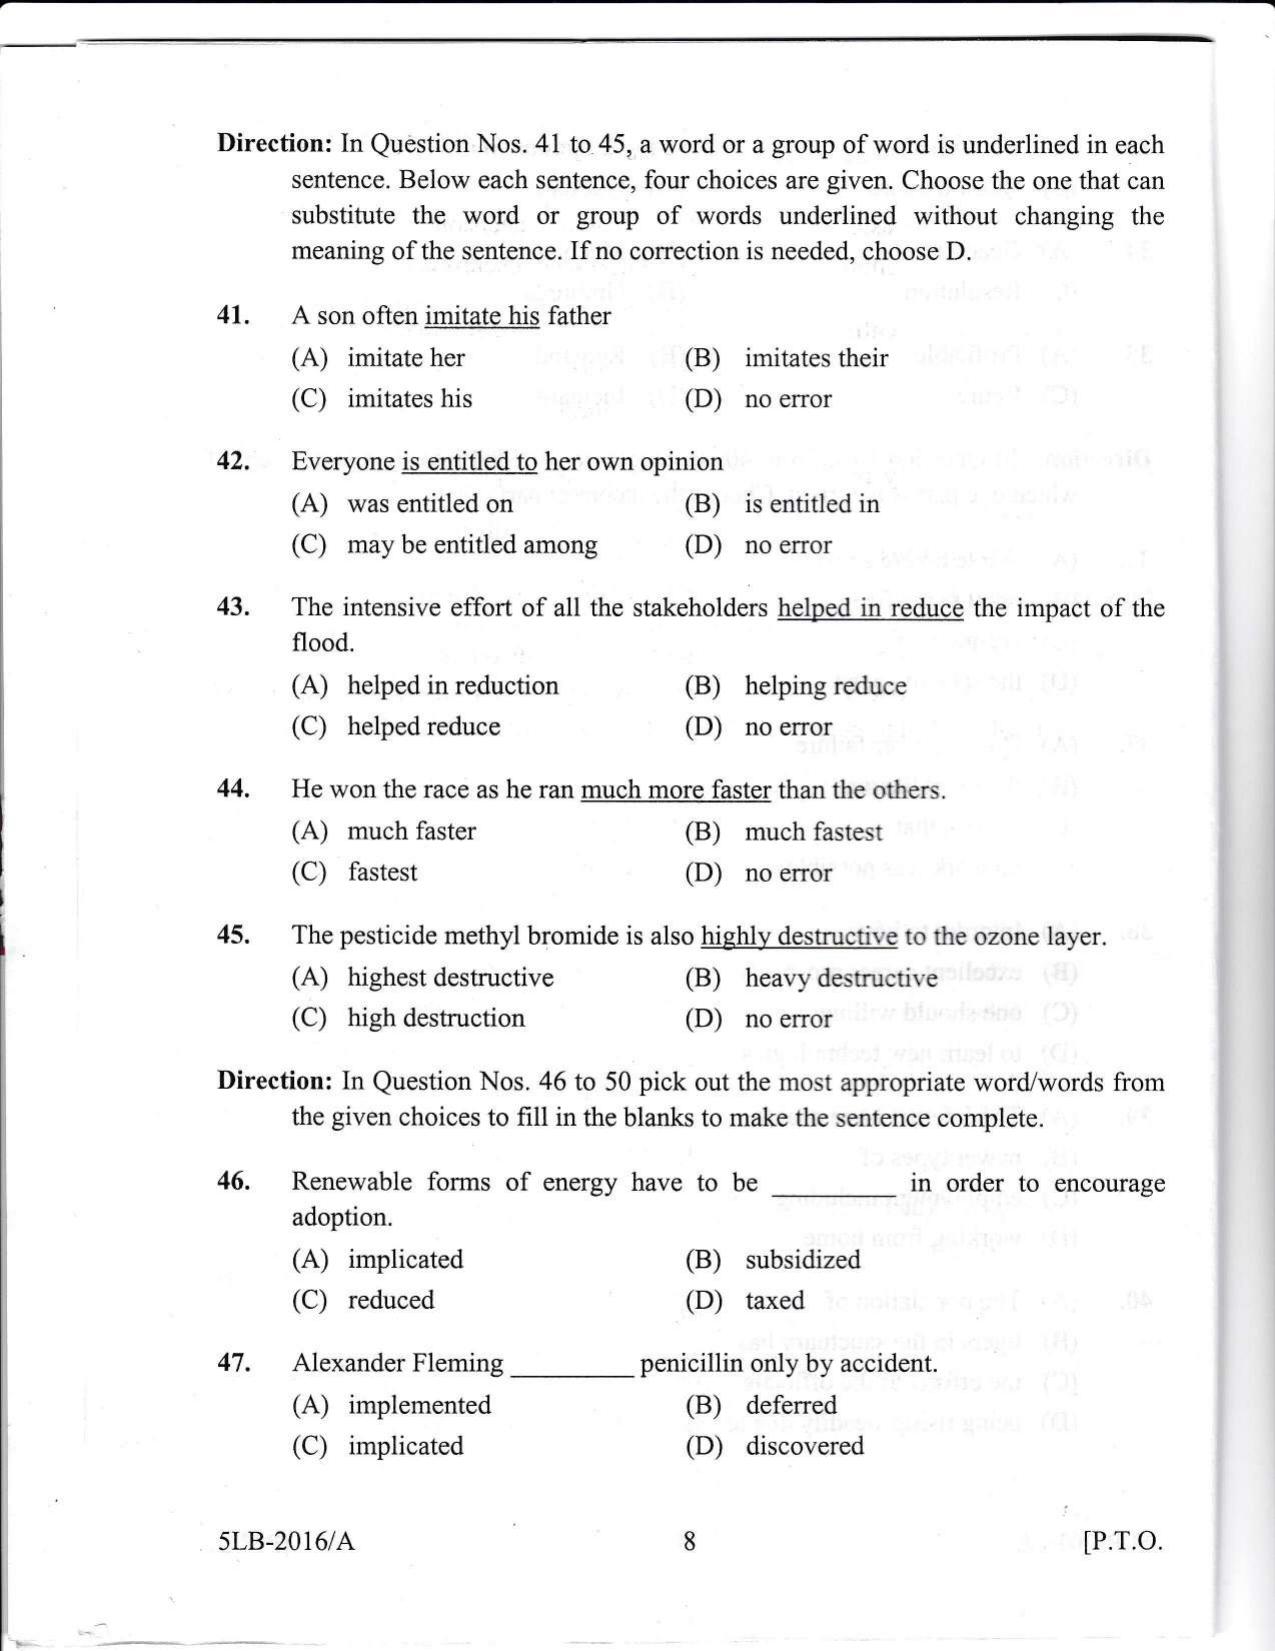 KLEE 5 Year LLB Exam 2016 Question Paper - Page 8